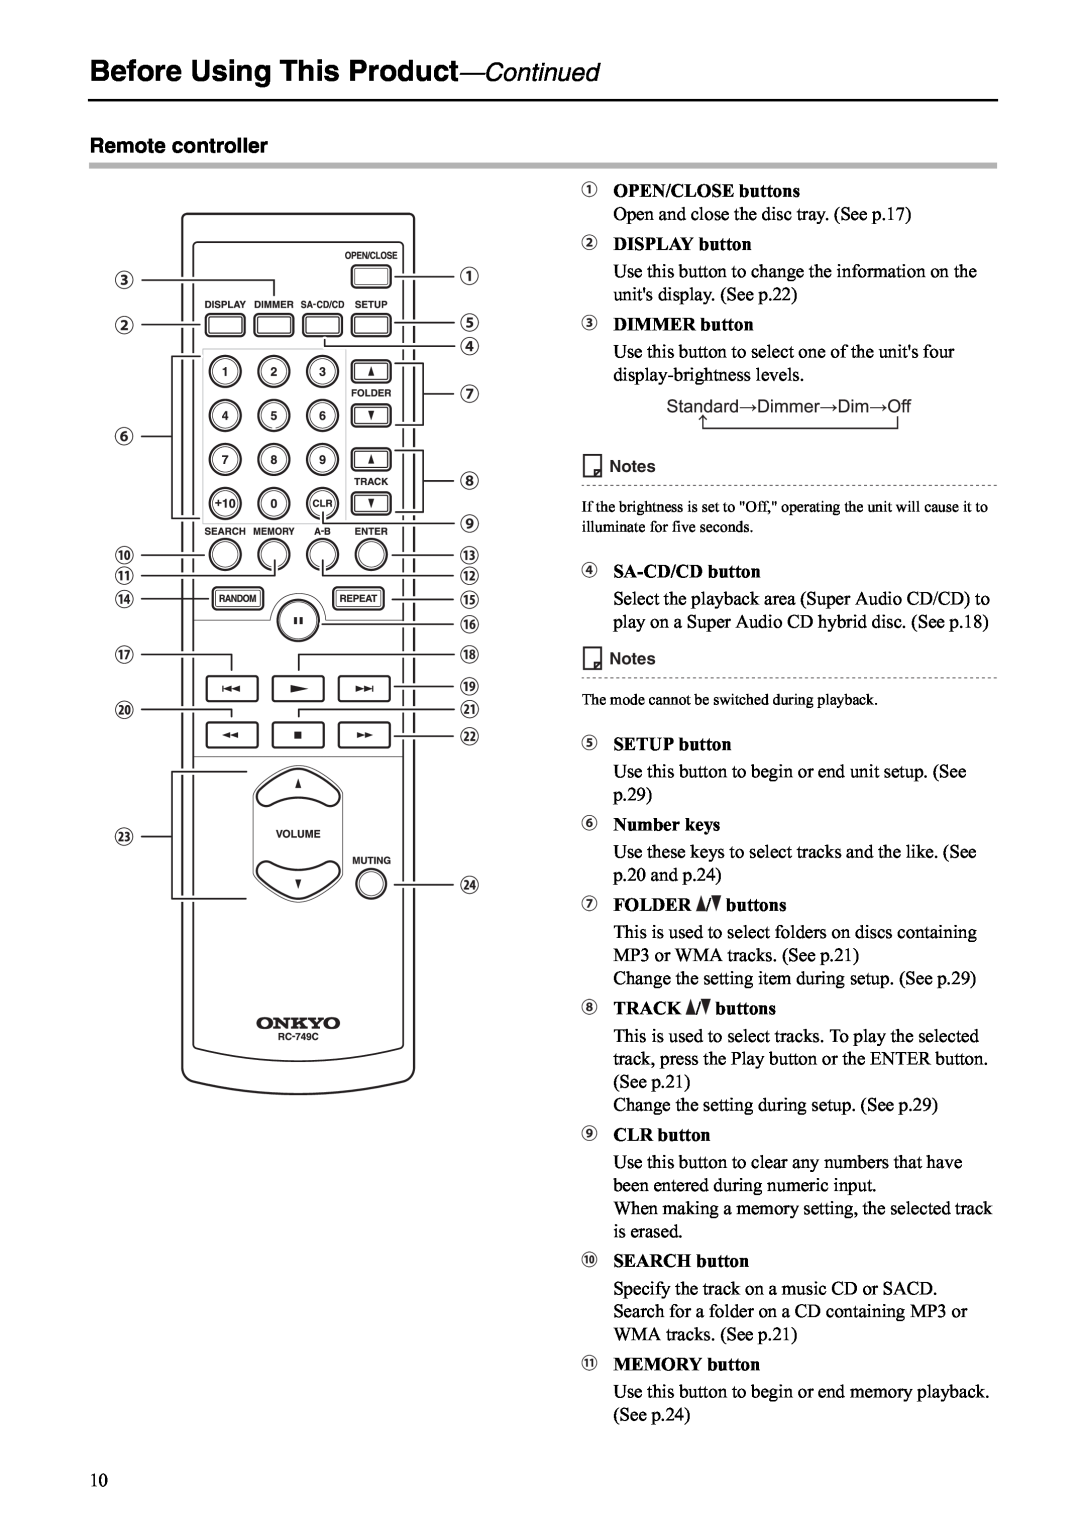 Onkyo C-S5VL instruction manual Remote controller, Before Using This Product-Continued 